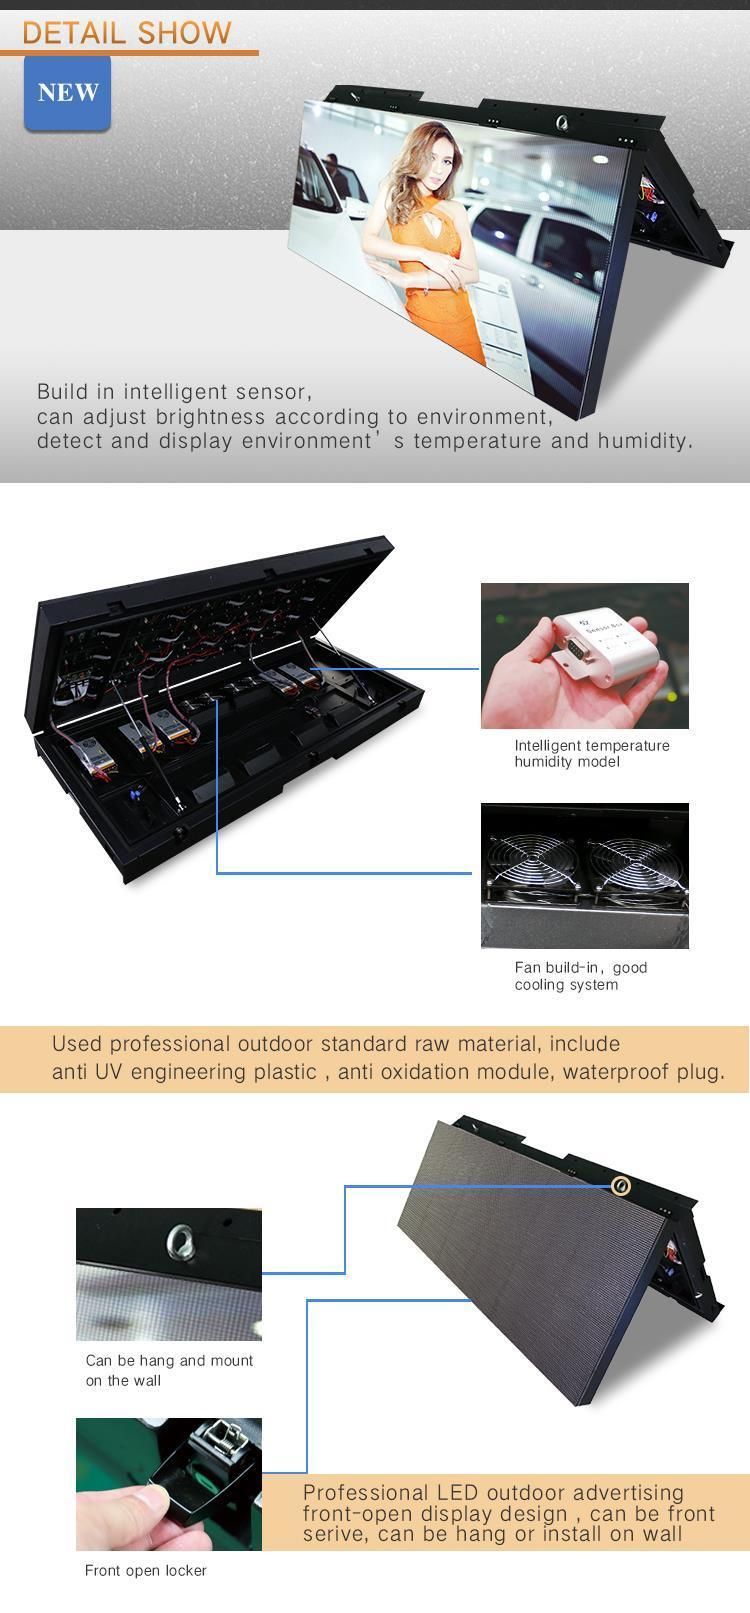 Outdoor P4 LED Screen Front Open LED Display Front Maintenance Display Outdoor Customized LED Display P4